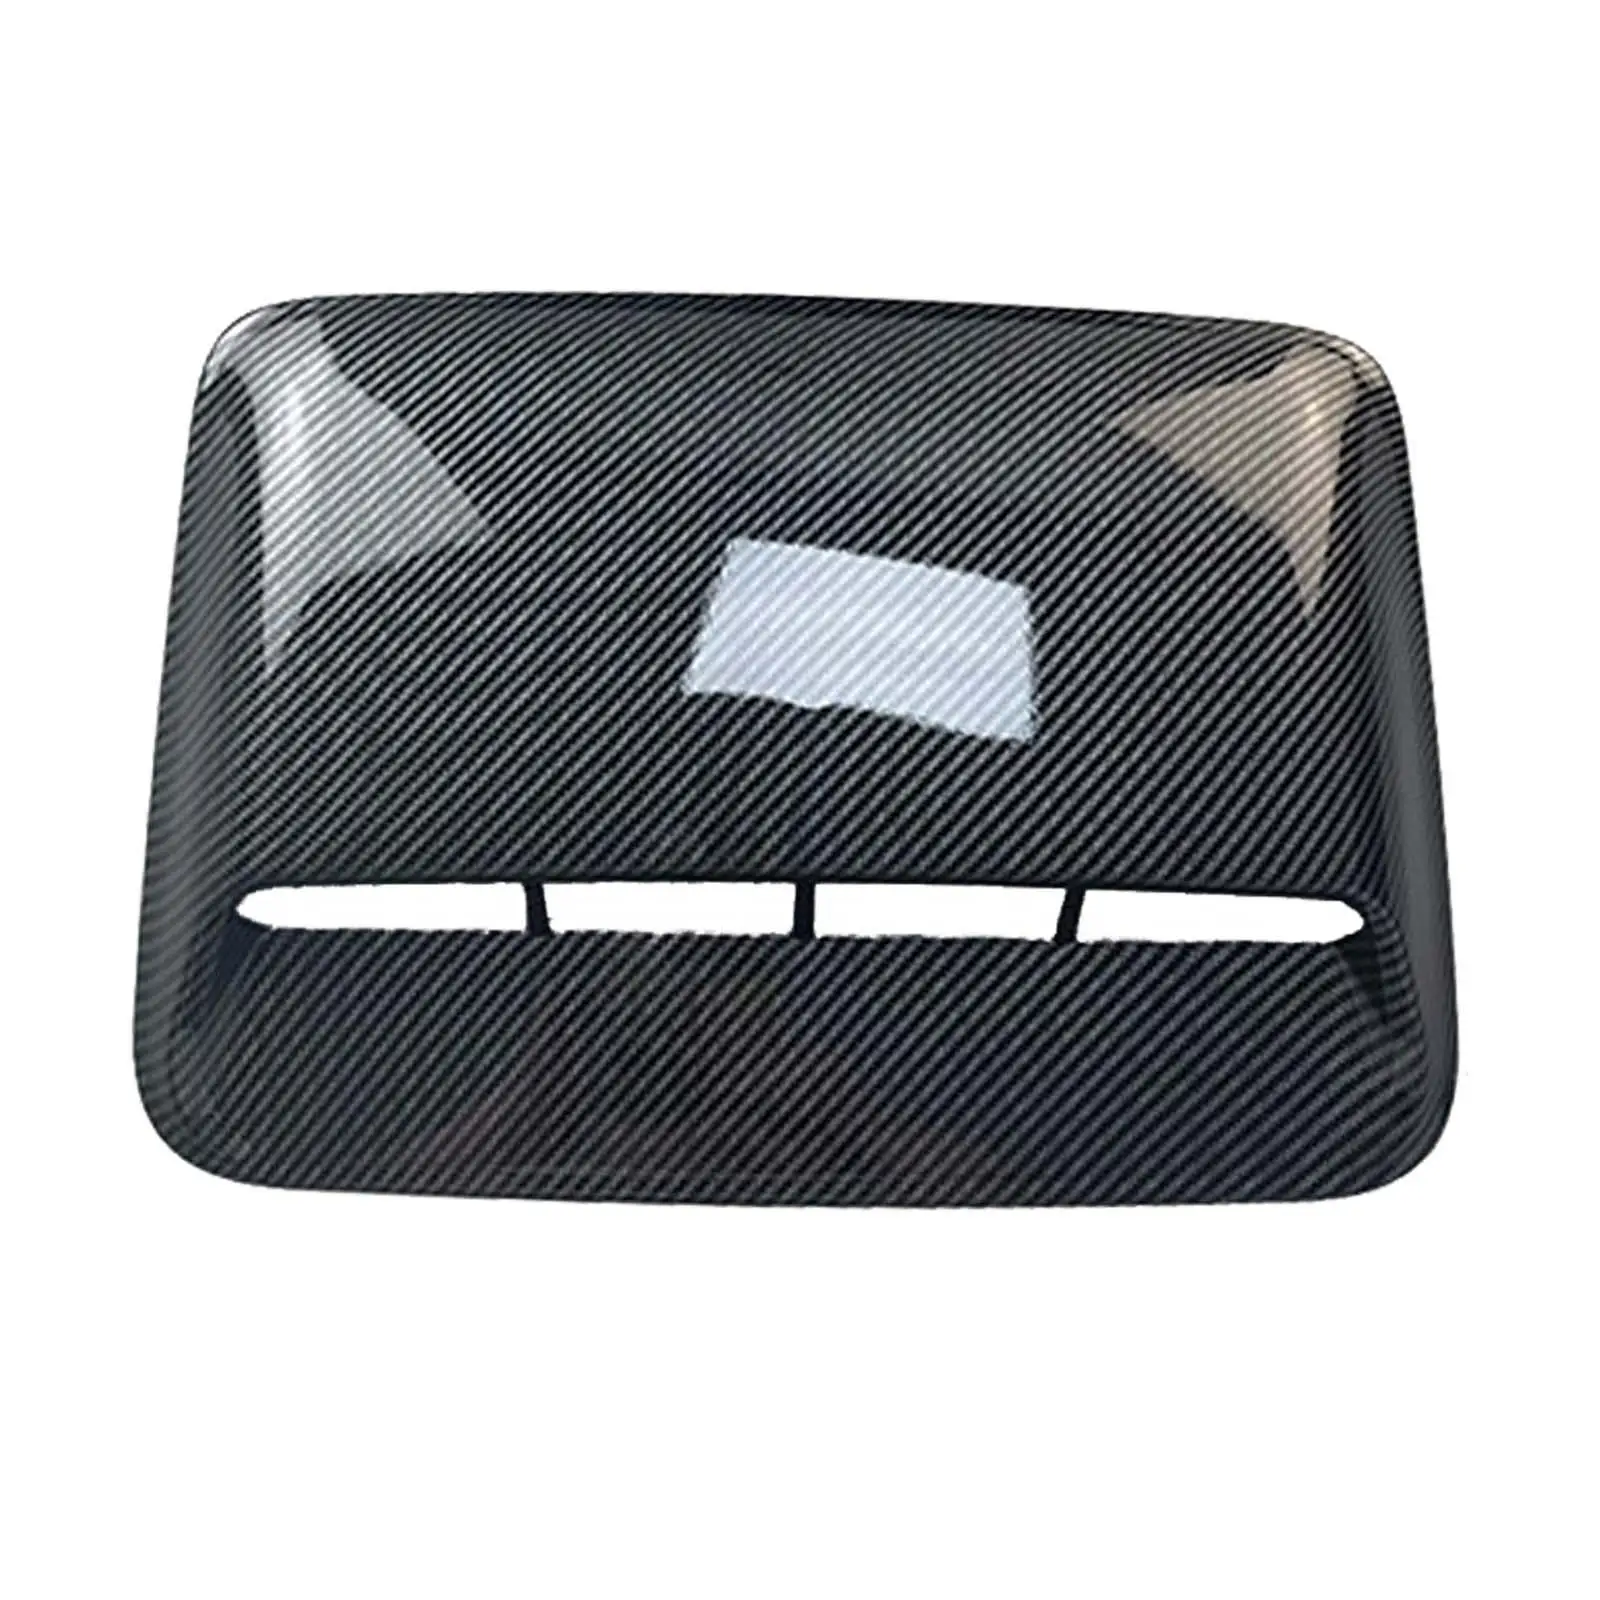 Hood Scoop Vent Cover Car Hood Vent for Car Modification Sturdy Quality